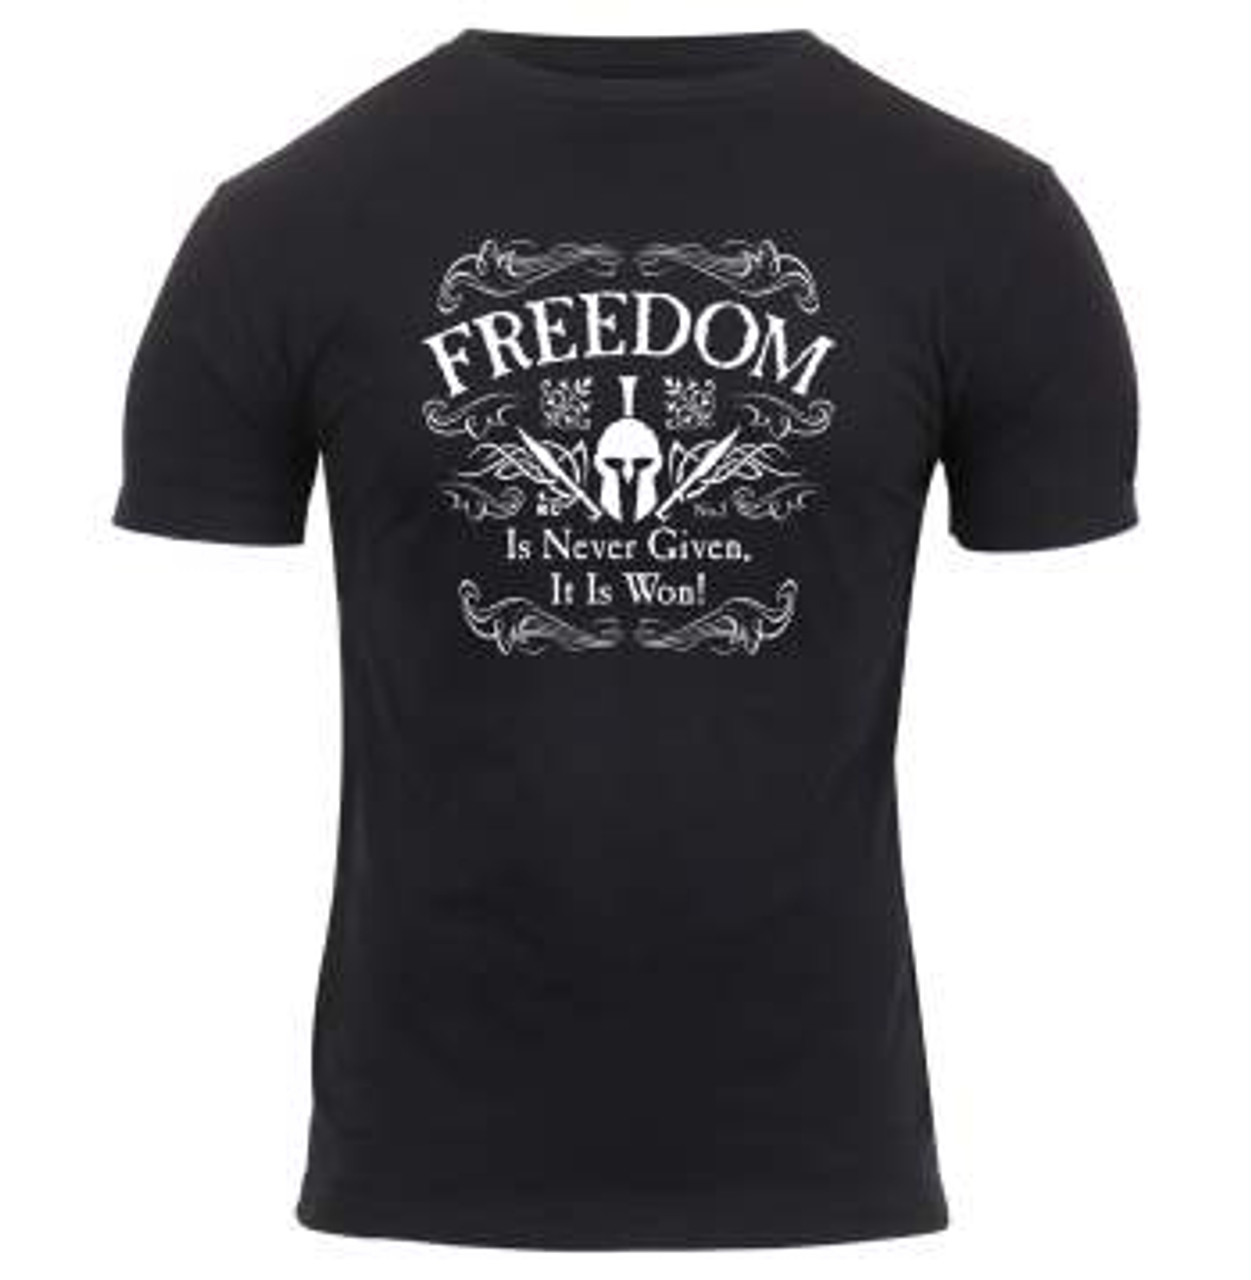 Rothco Athletic Fit Freedom T-Shirt, Large